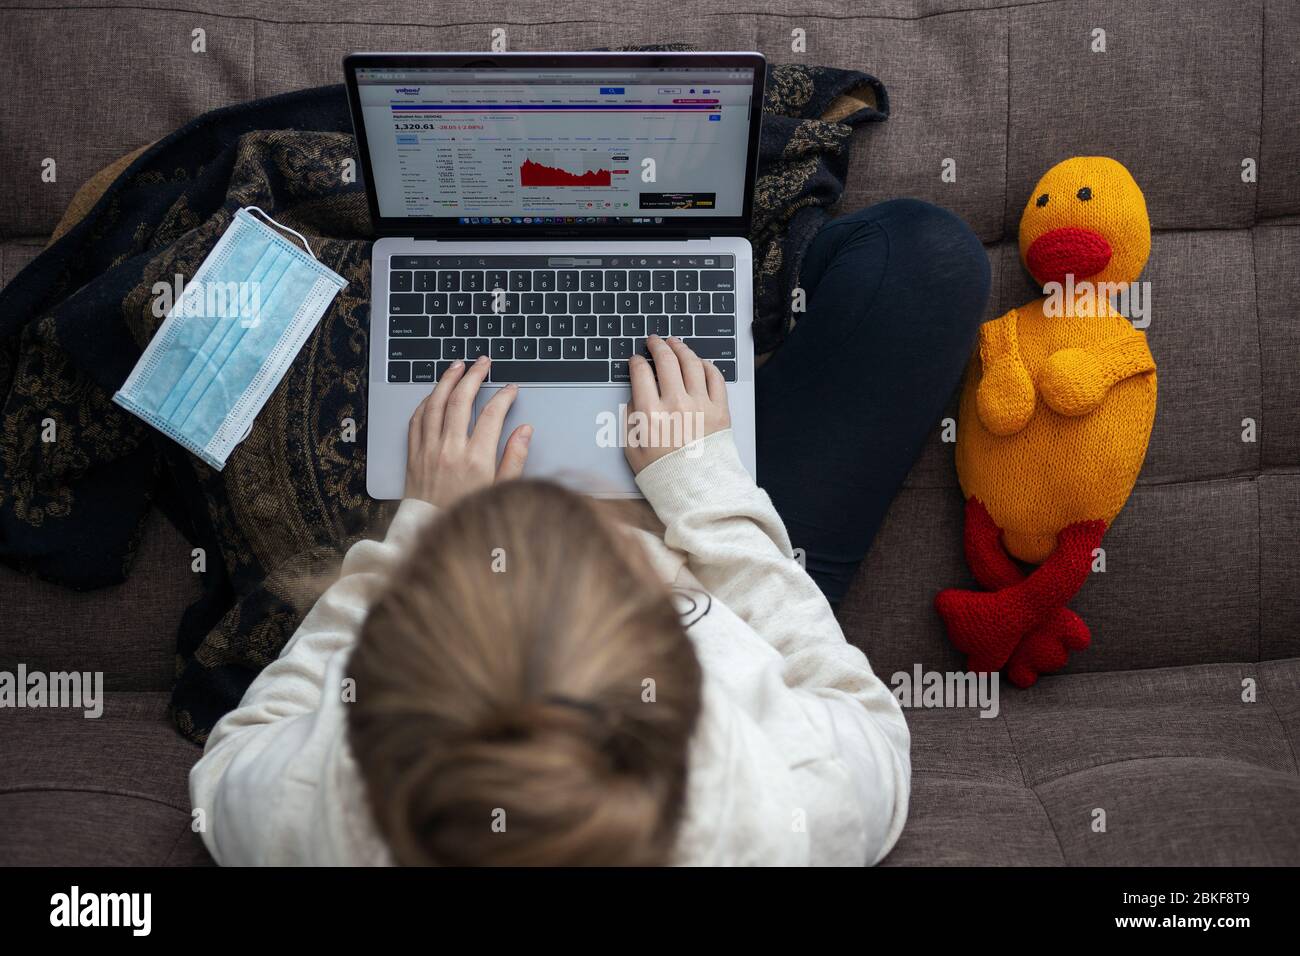 Toronto, Canada - May, 2,2020: Top view of woman sitting on sofa using laptop, with facial mask and stuffed toy. Work from home on the coronavirus qua Stock Photo